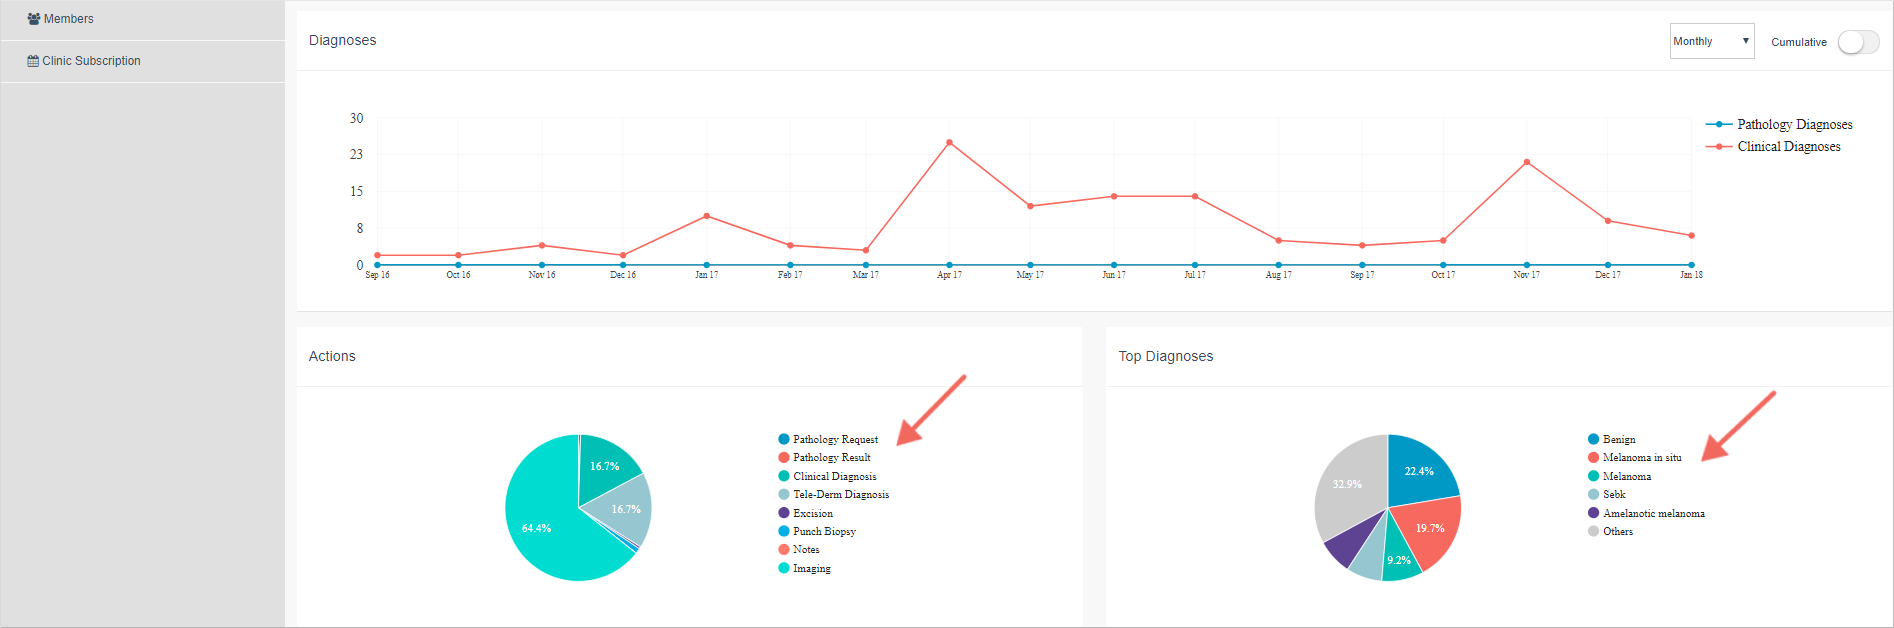 2_New_Clinic_Analytics_Dashboard.PNG